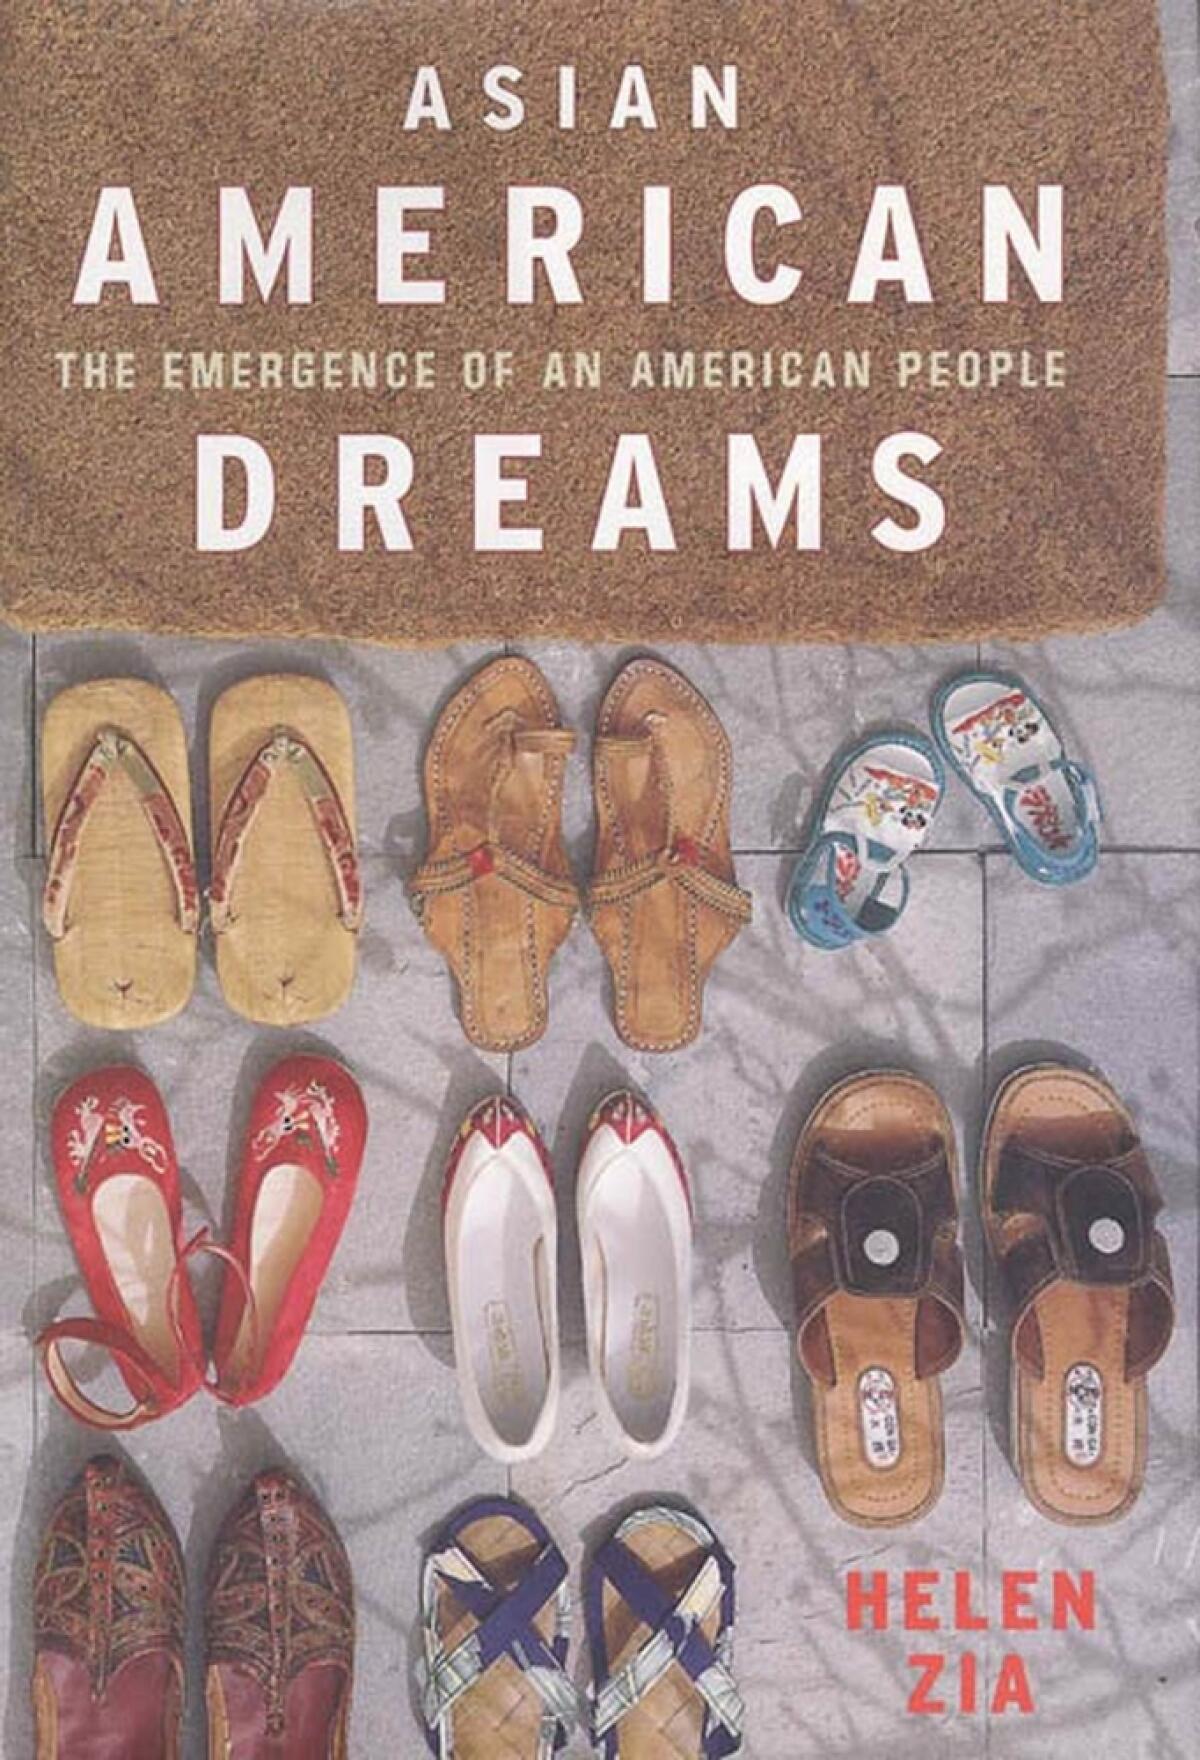 Book jacket for "Asian American Dreams: The Emergence of an American People" by Helen Zia